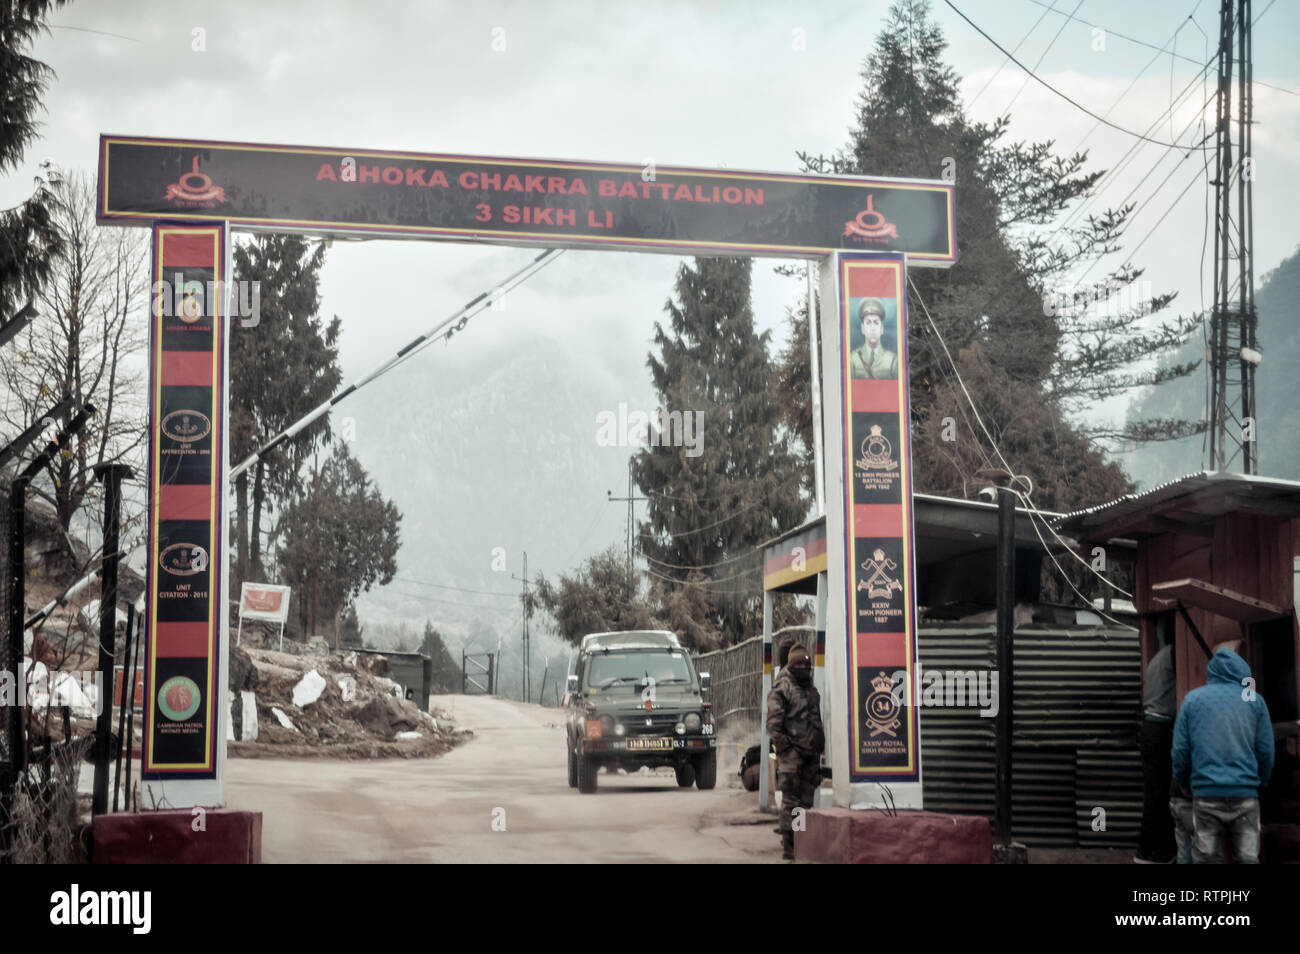 Pulwama, Jammu Srinagar National Highway, India 14 February 2019: Indian post after attacked by vehicle-borne suicide bomber by Pakistani Islamist mil Stock Photo